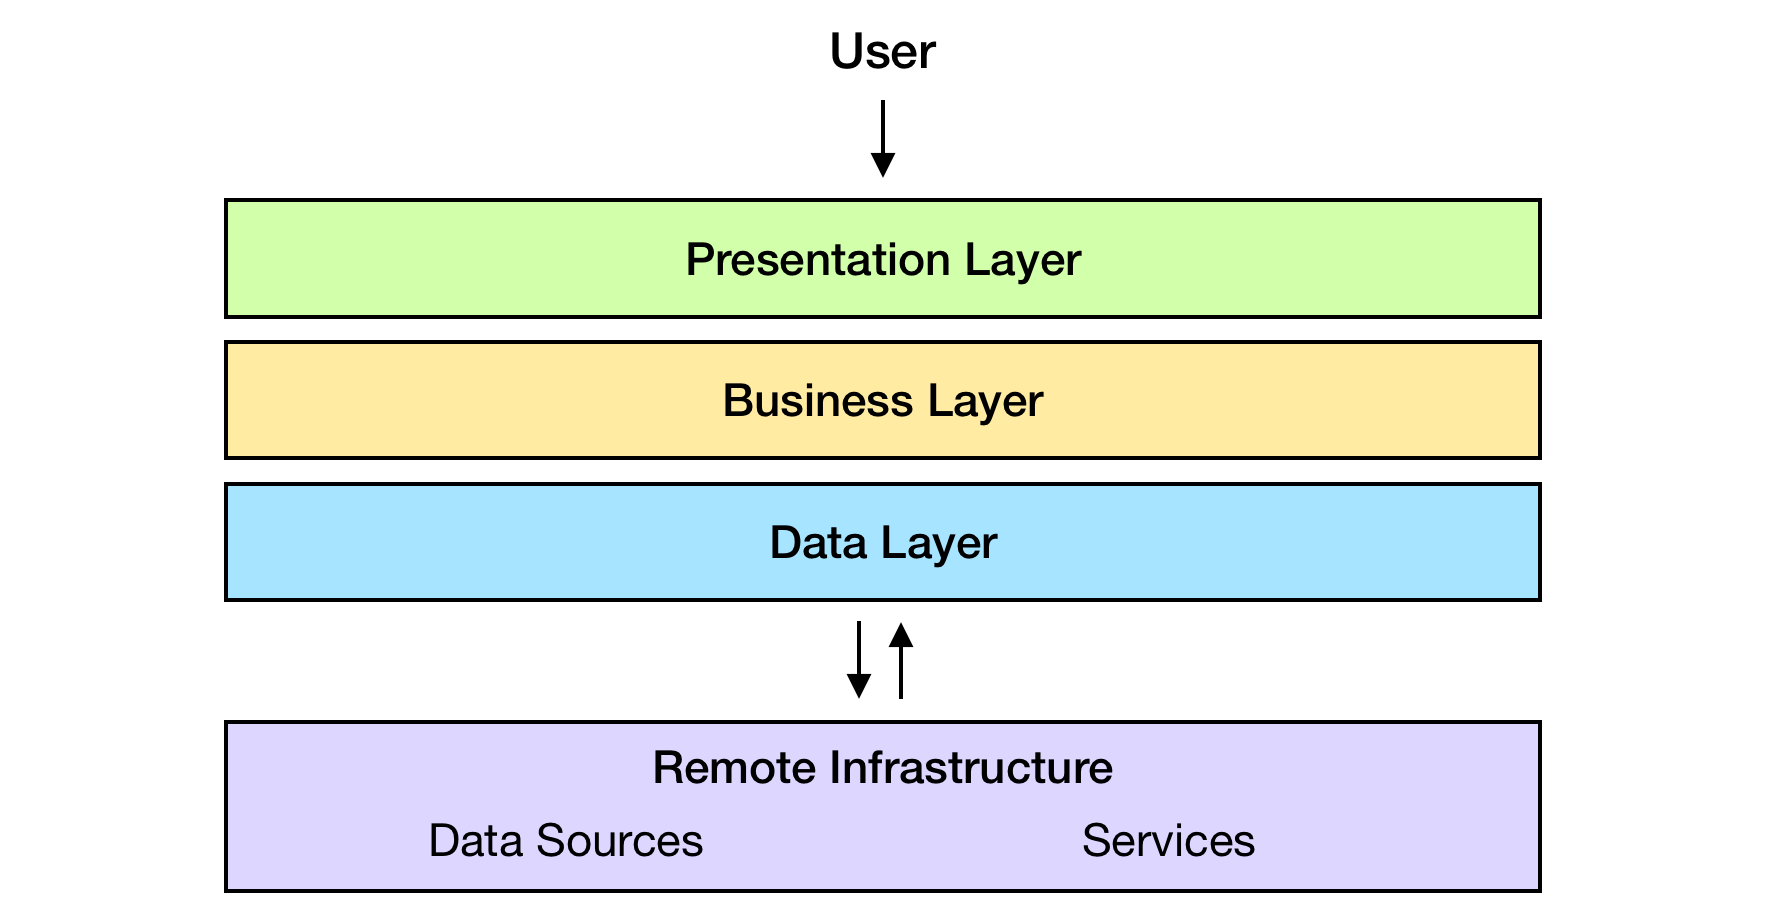 Mobile App Architecture Layers